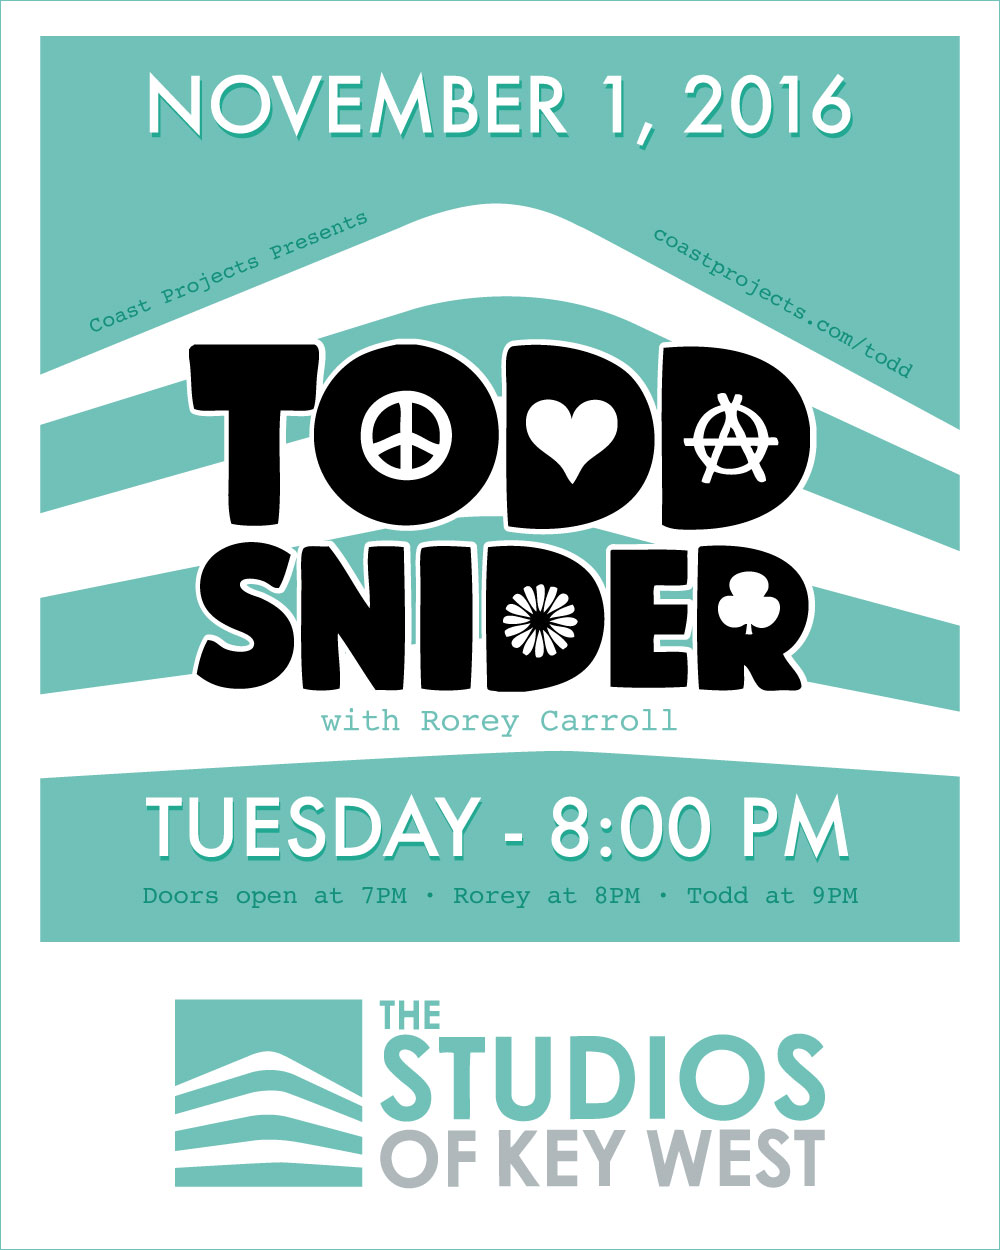 Folk legend Todd Snider takes on Old Town at the newly renovated Studios of Key West Theater for an intimate, seated show in the heart of the historic district. Tickets are general admission and will sell fast.
Rorey Carroll will open at 8:00pm.